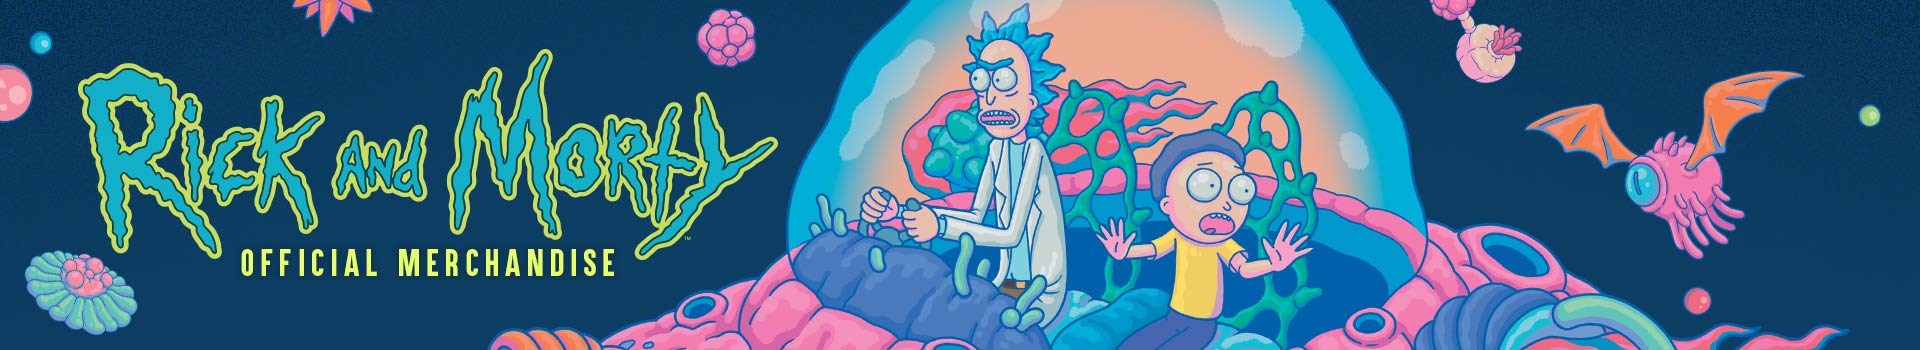 R&M Top banner